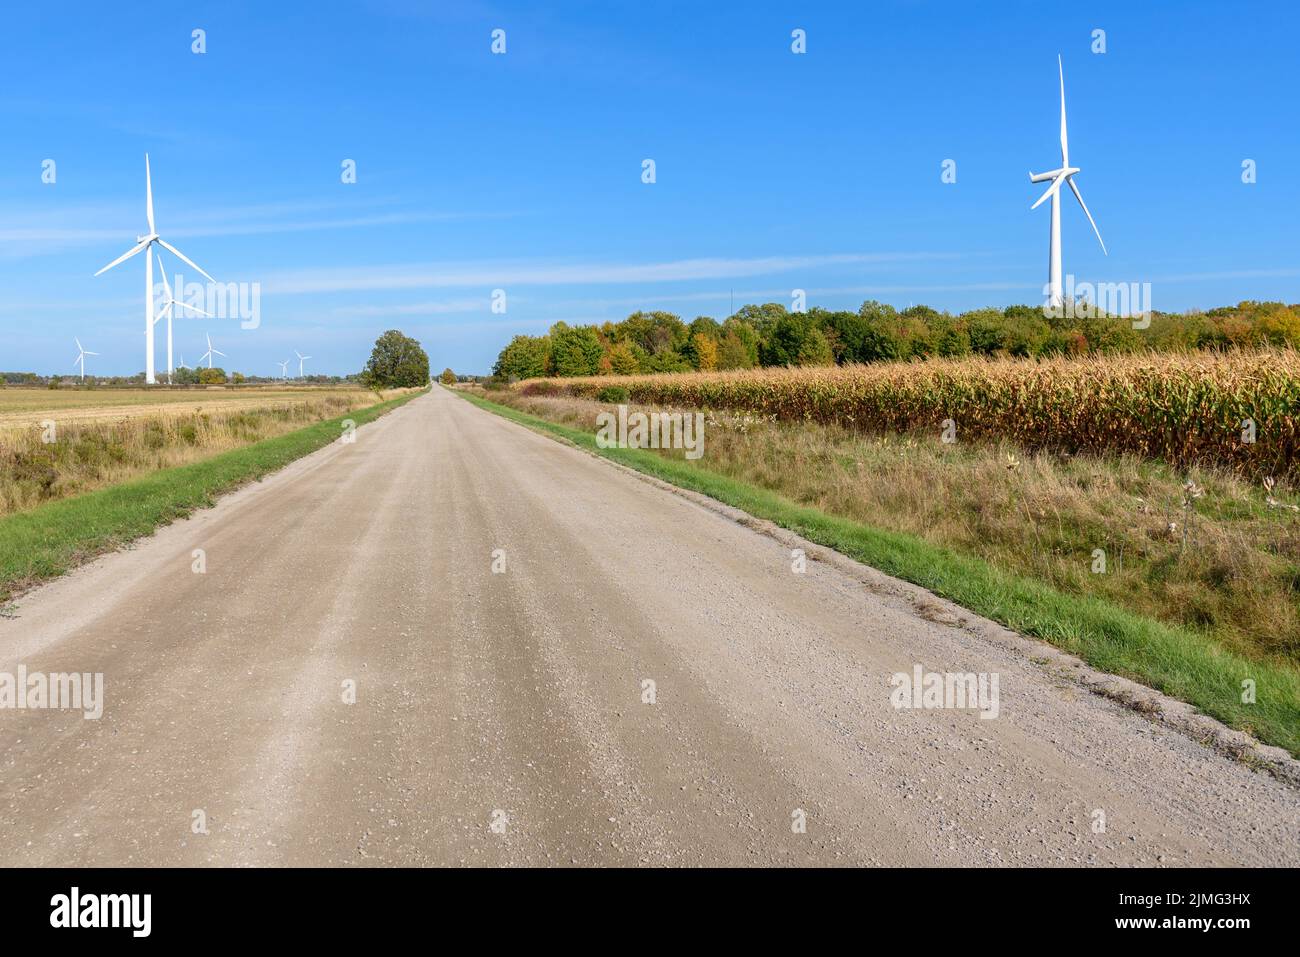 Wind turbines along a straight unpaved country road under blue sky in autumn Stock Photo